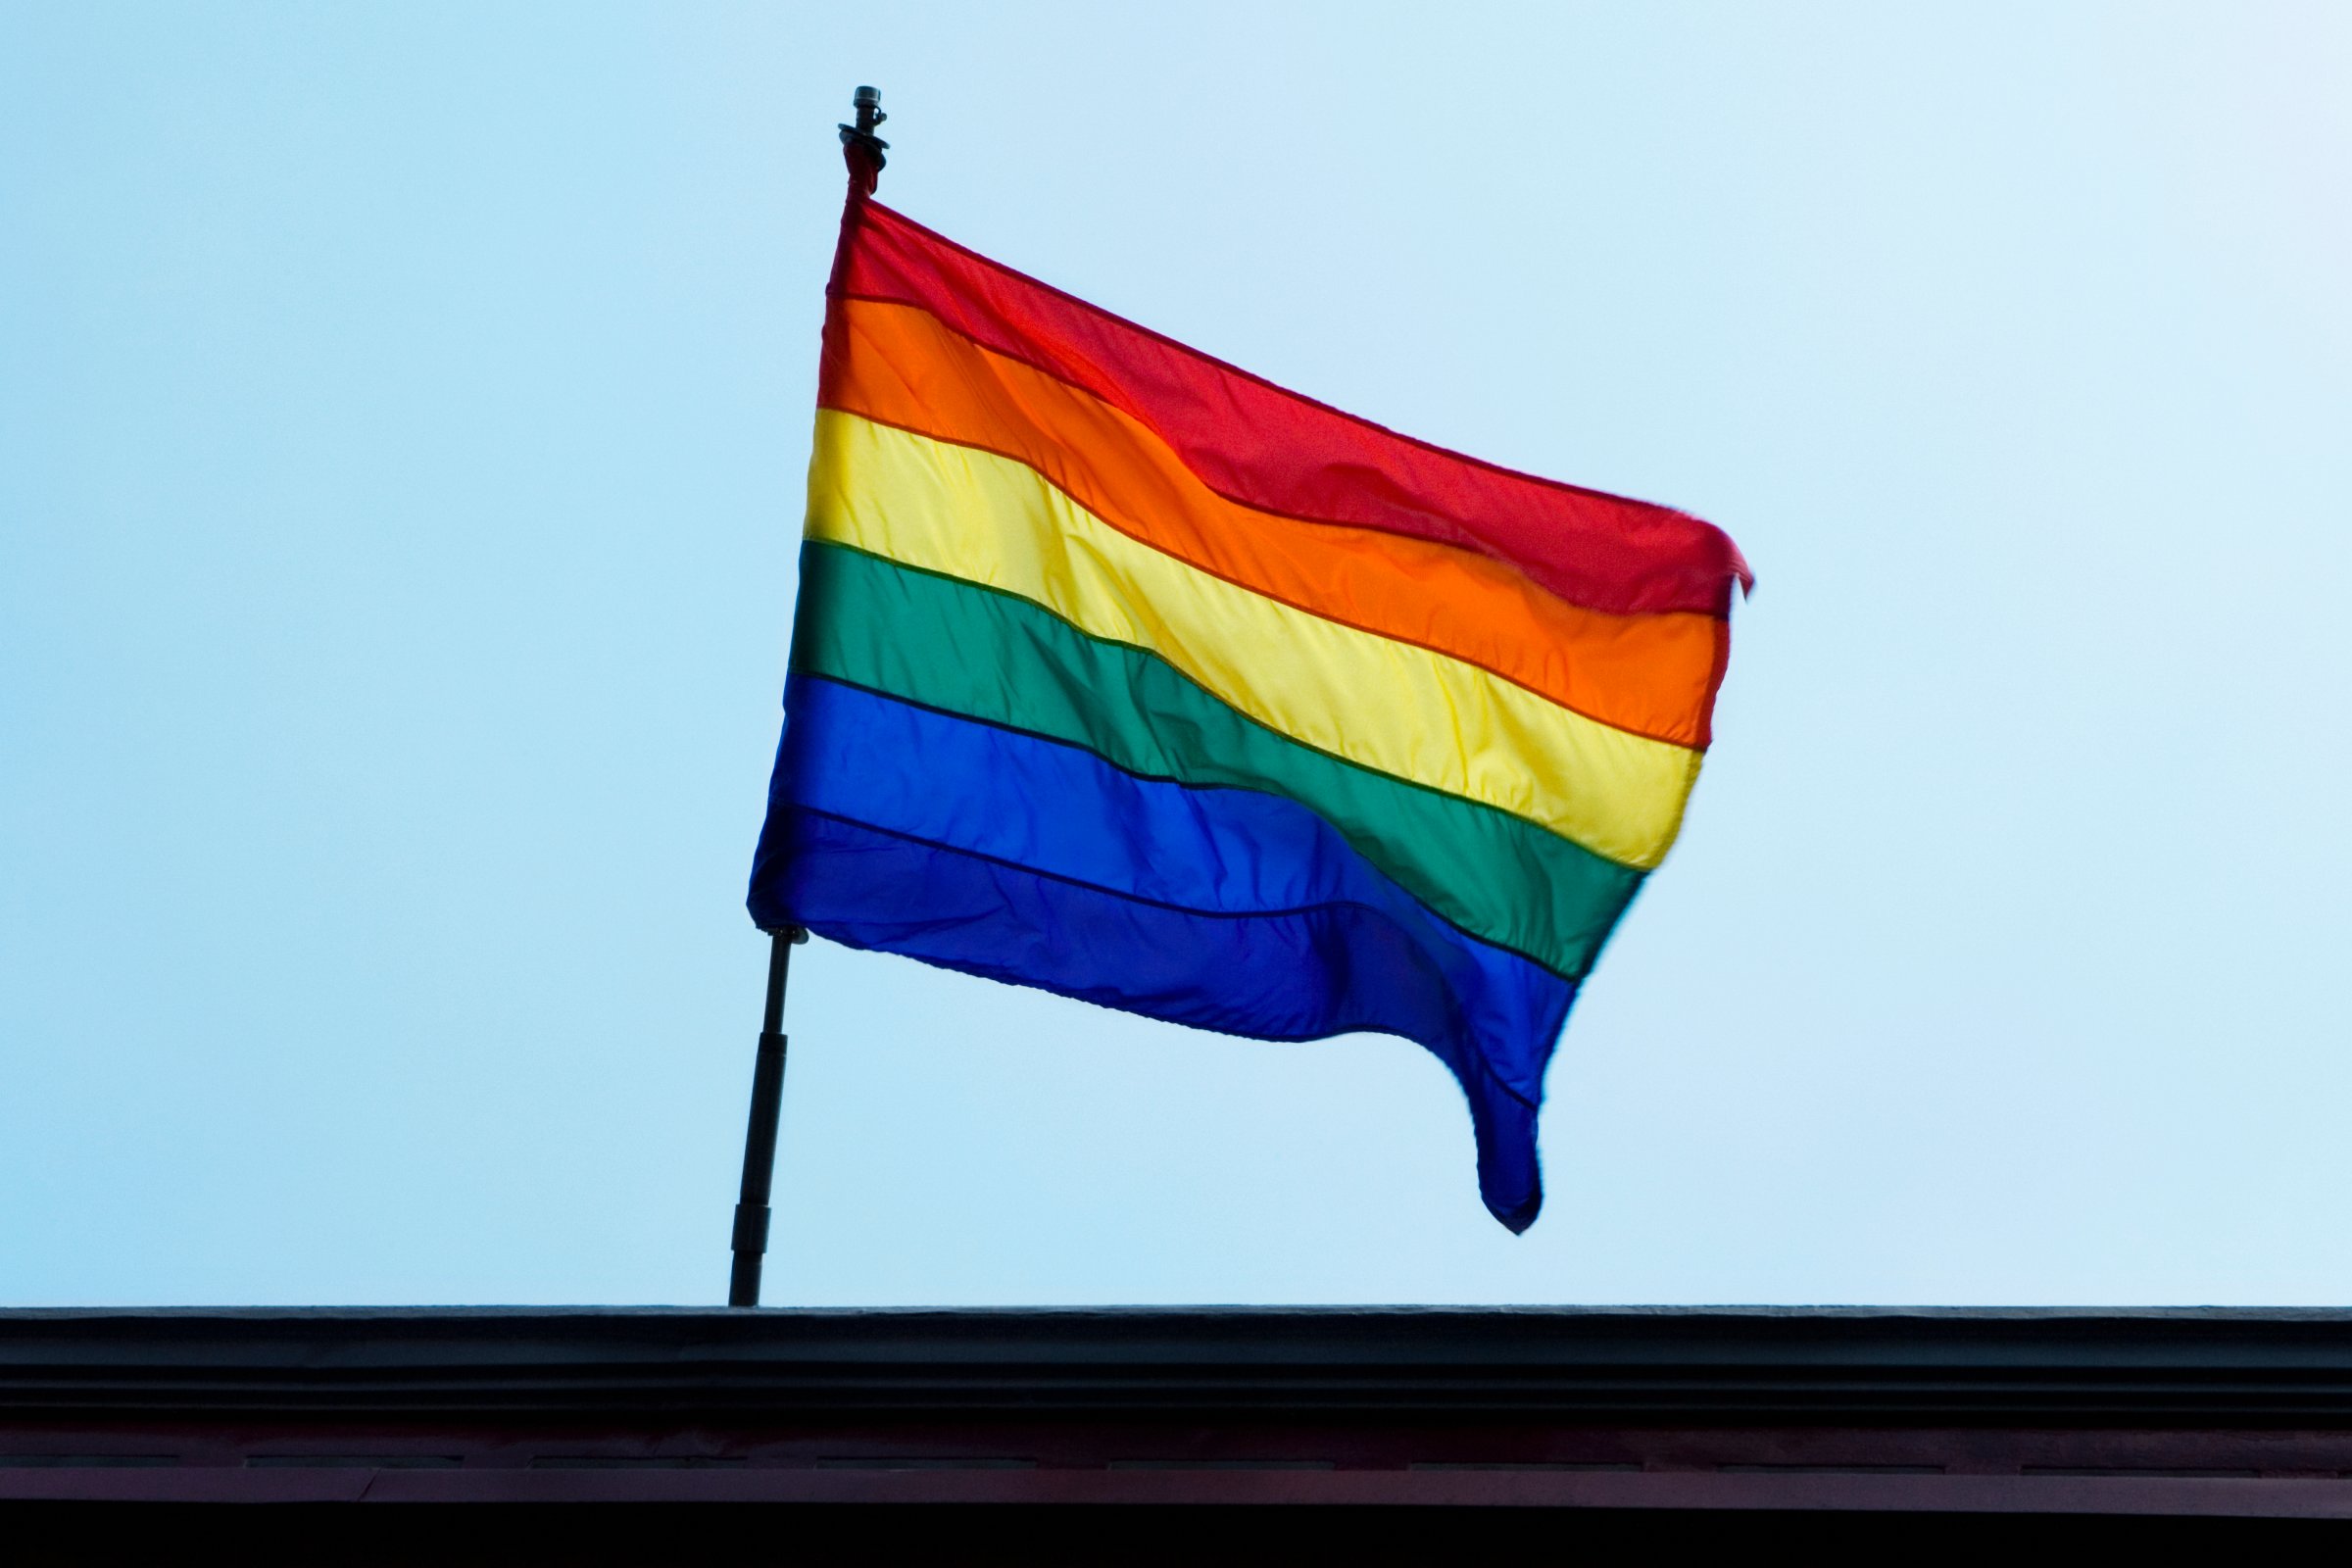 Low angle view of a rainbow flag fluttering